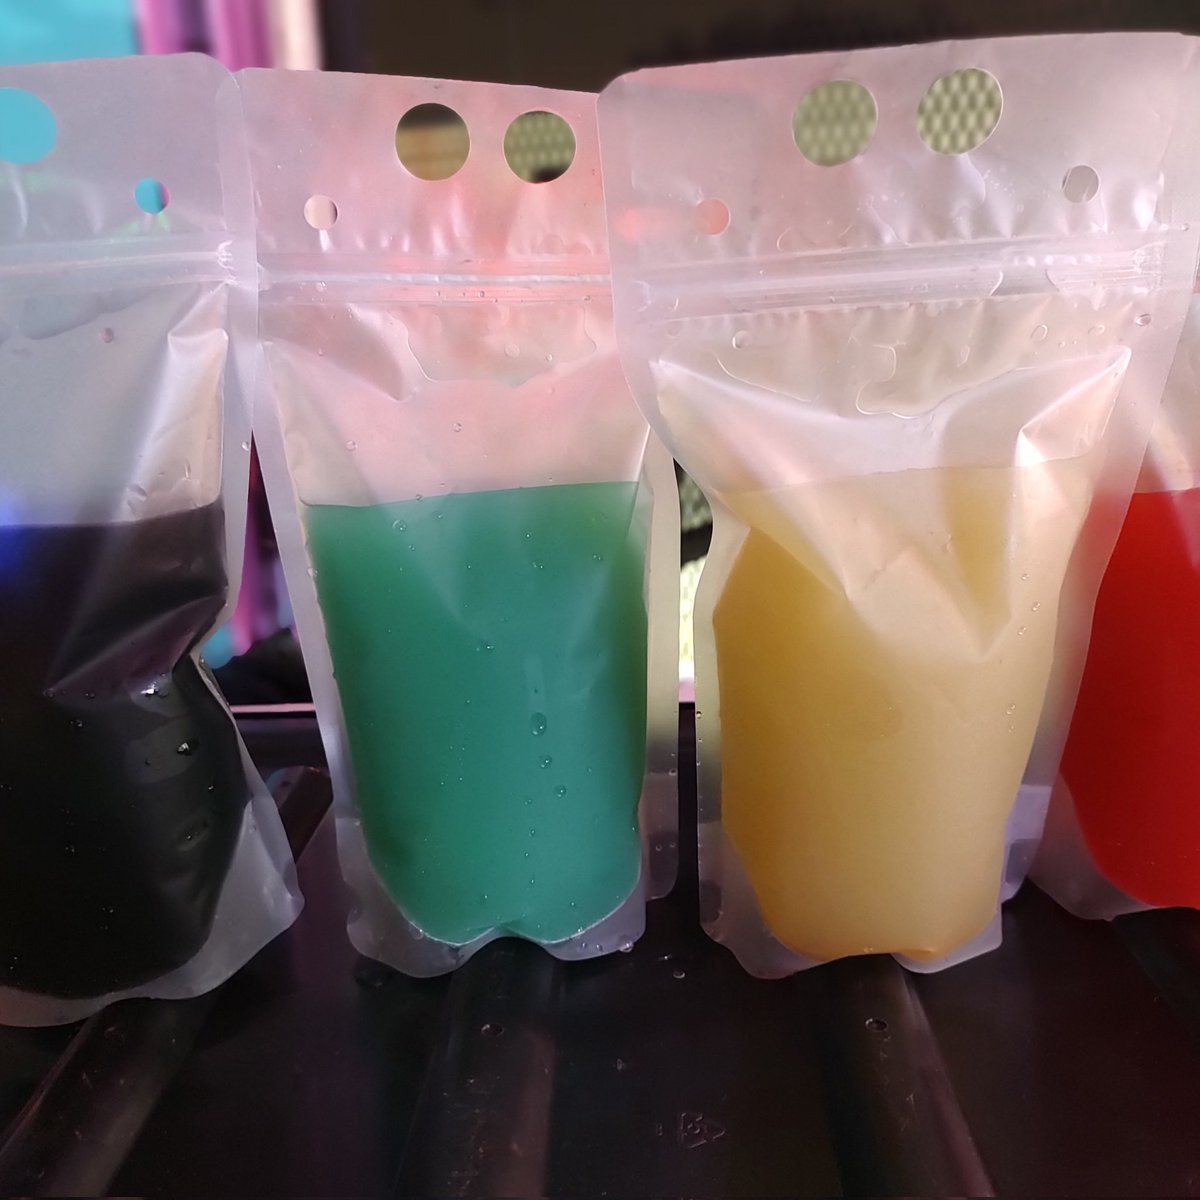 Thirsty? Drink THC weed infused Kool aids made with alkaline water. DM for pricing delivery options available in Houston #houston #houstonfoodie